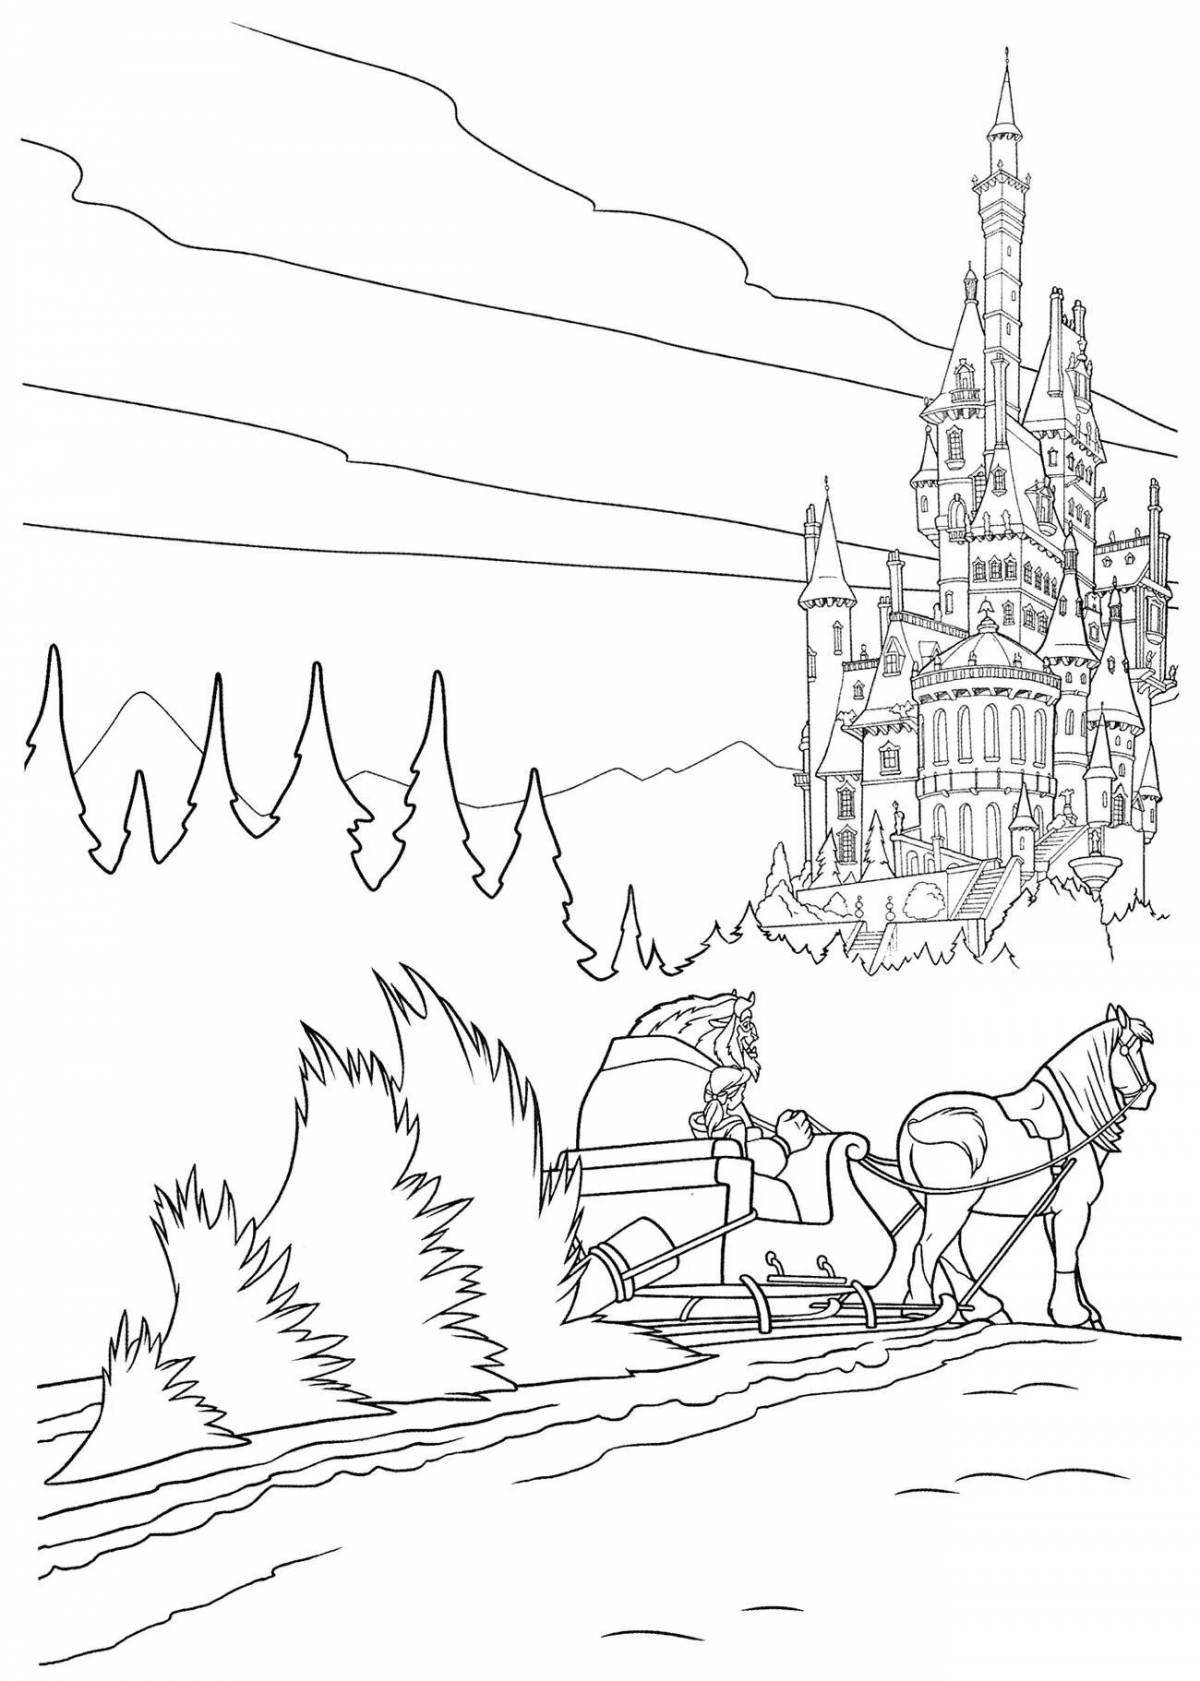 Coloring page of the snow queen's charming palace